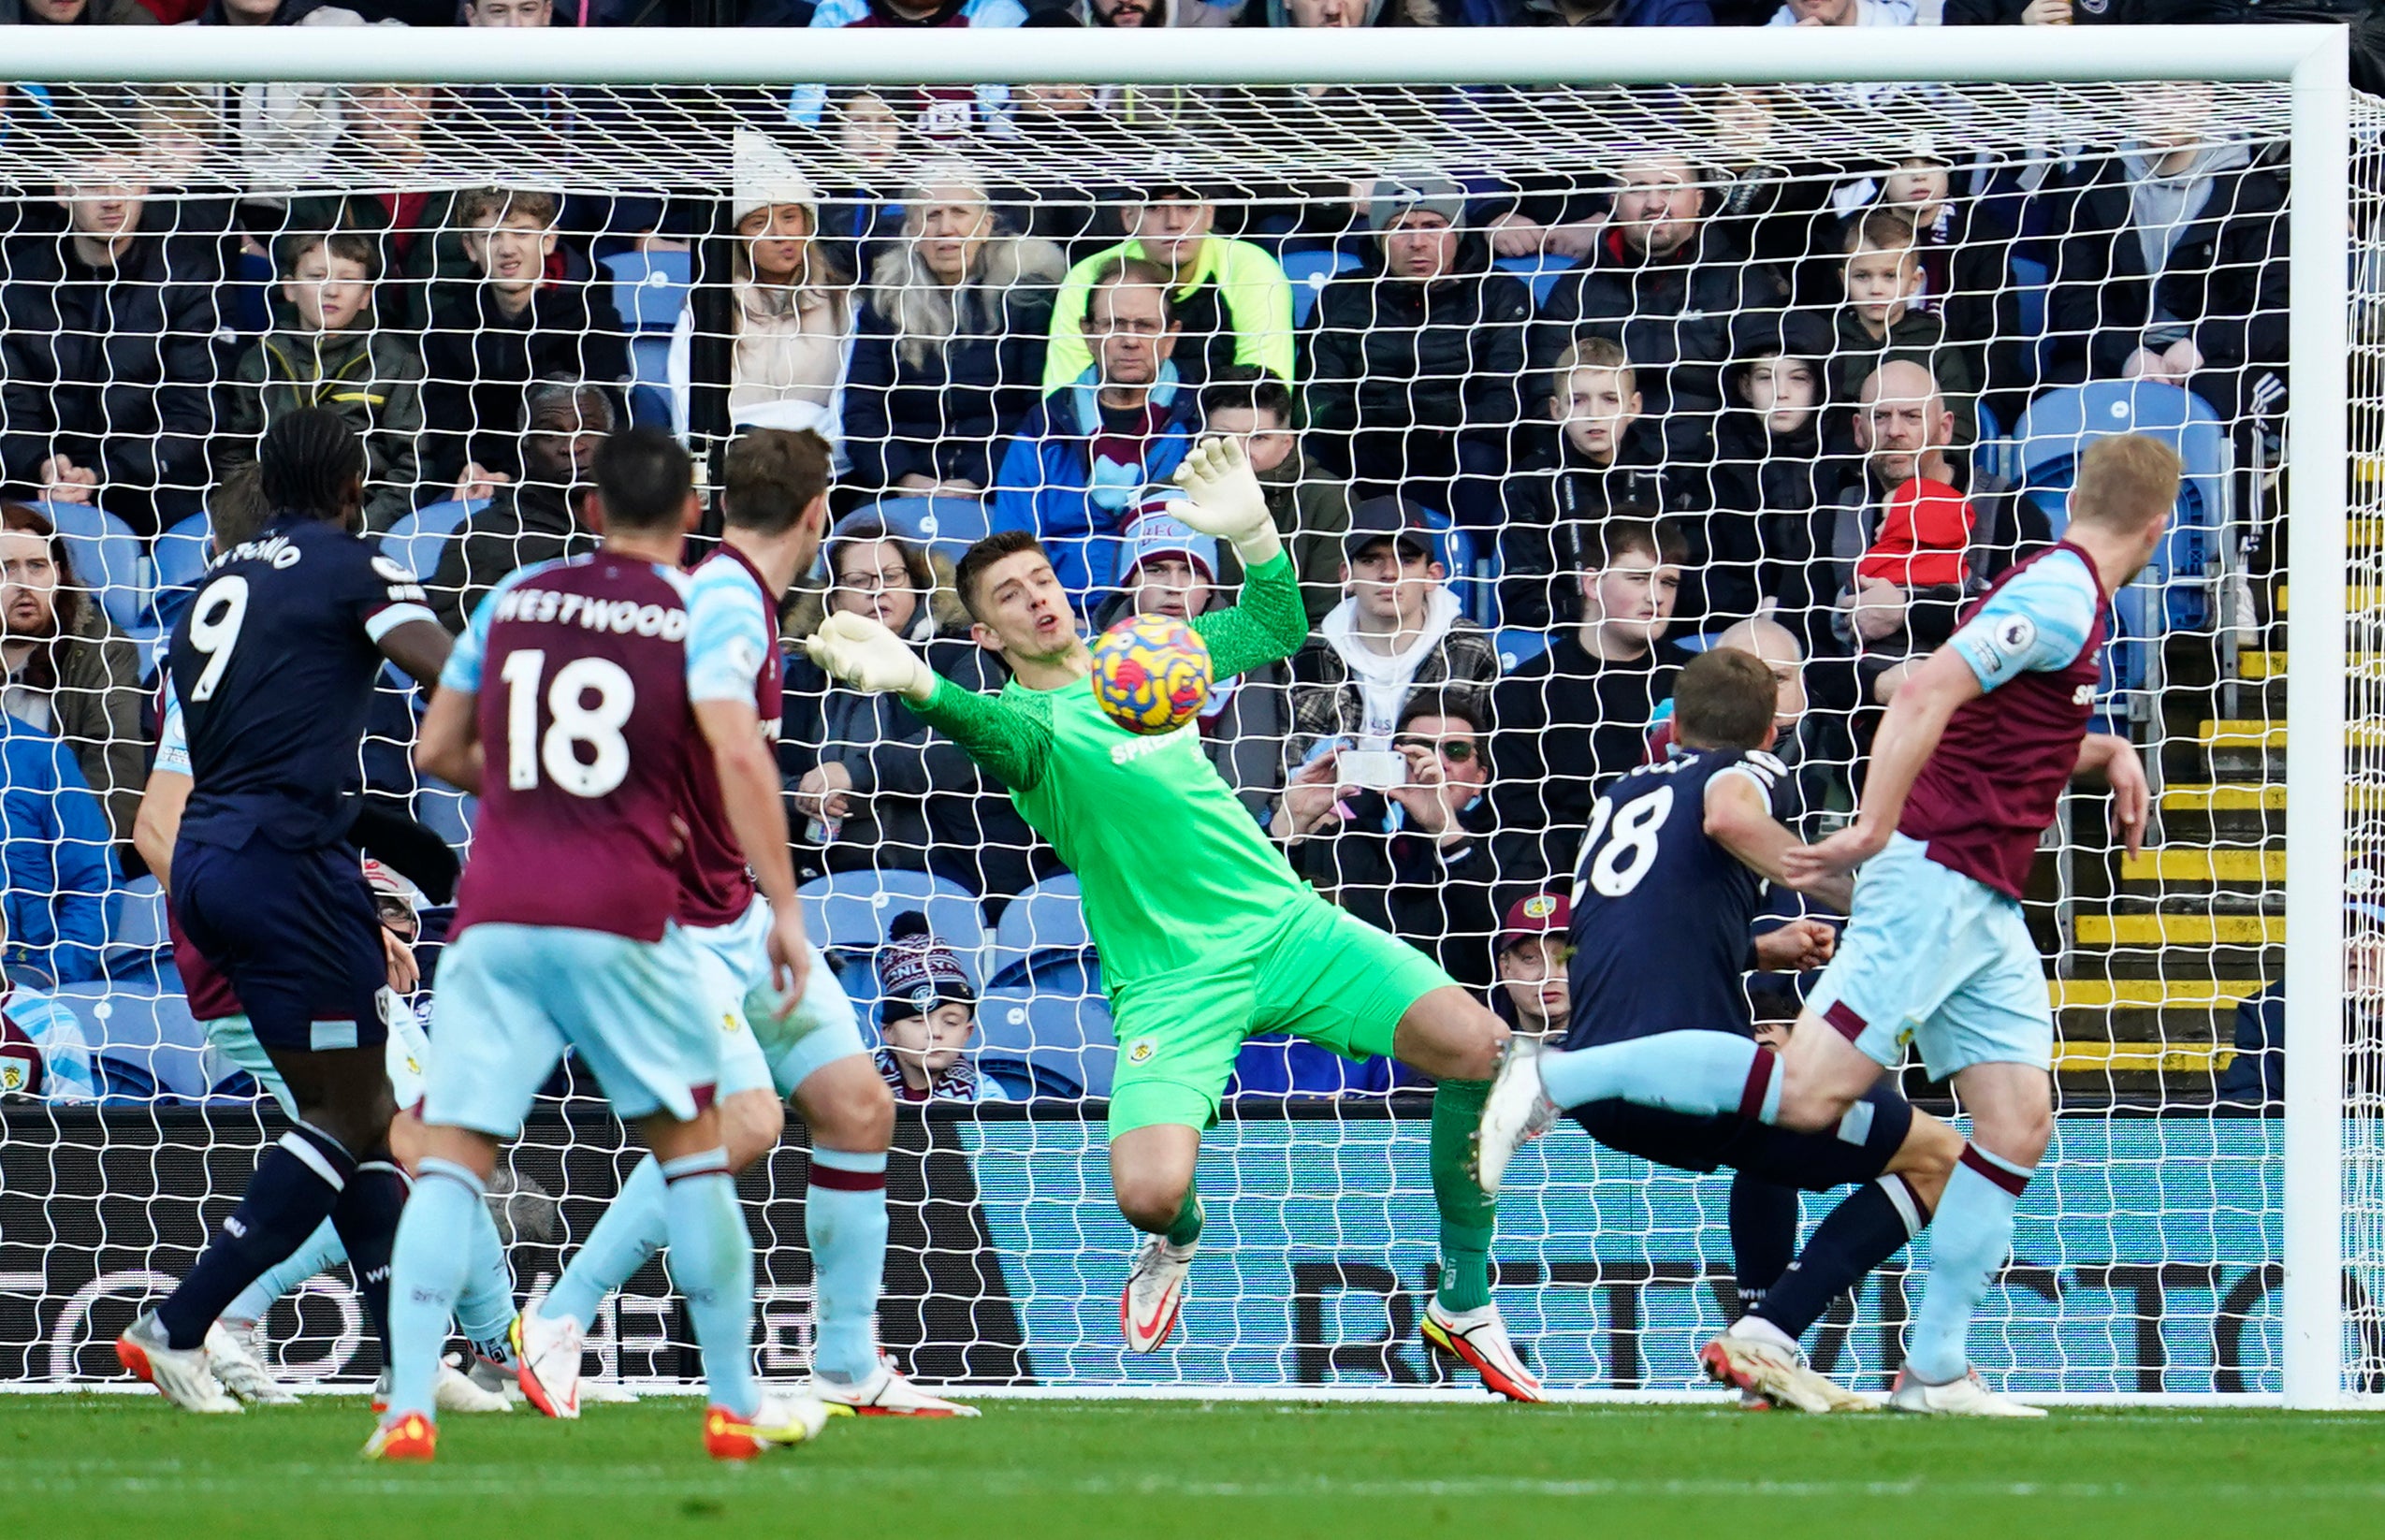 Burnley's goalkeeper Nick Pope makes a save in front of West Ham's Tomas Soucek